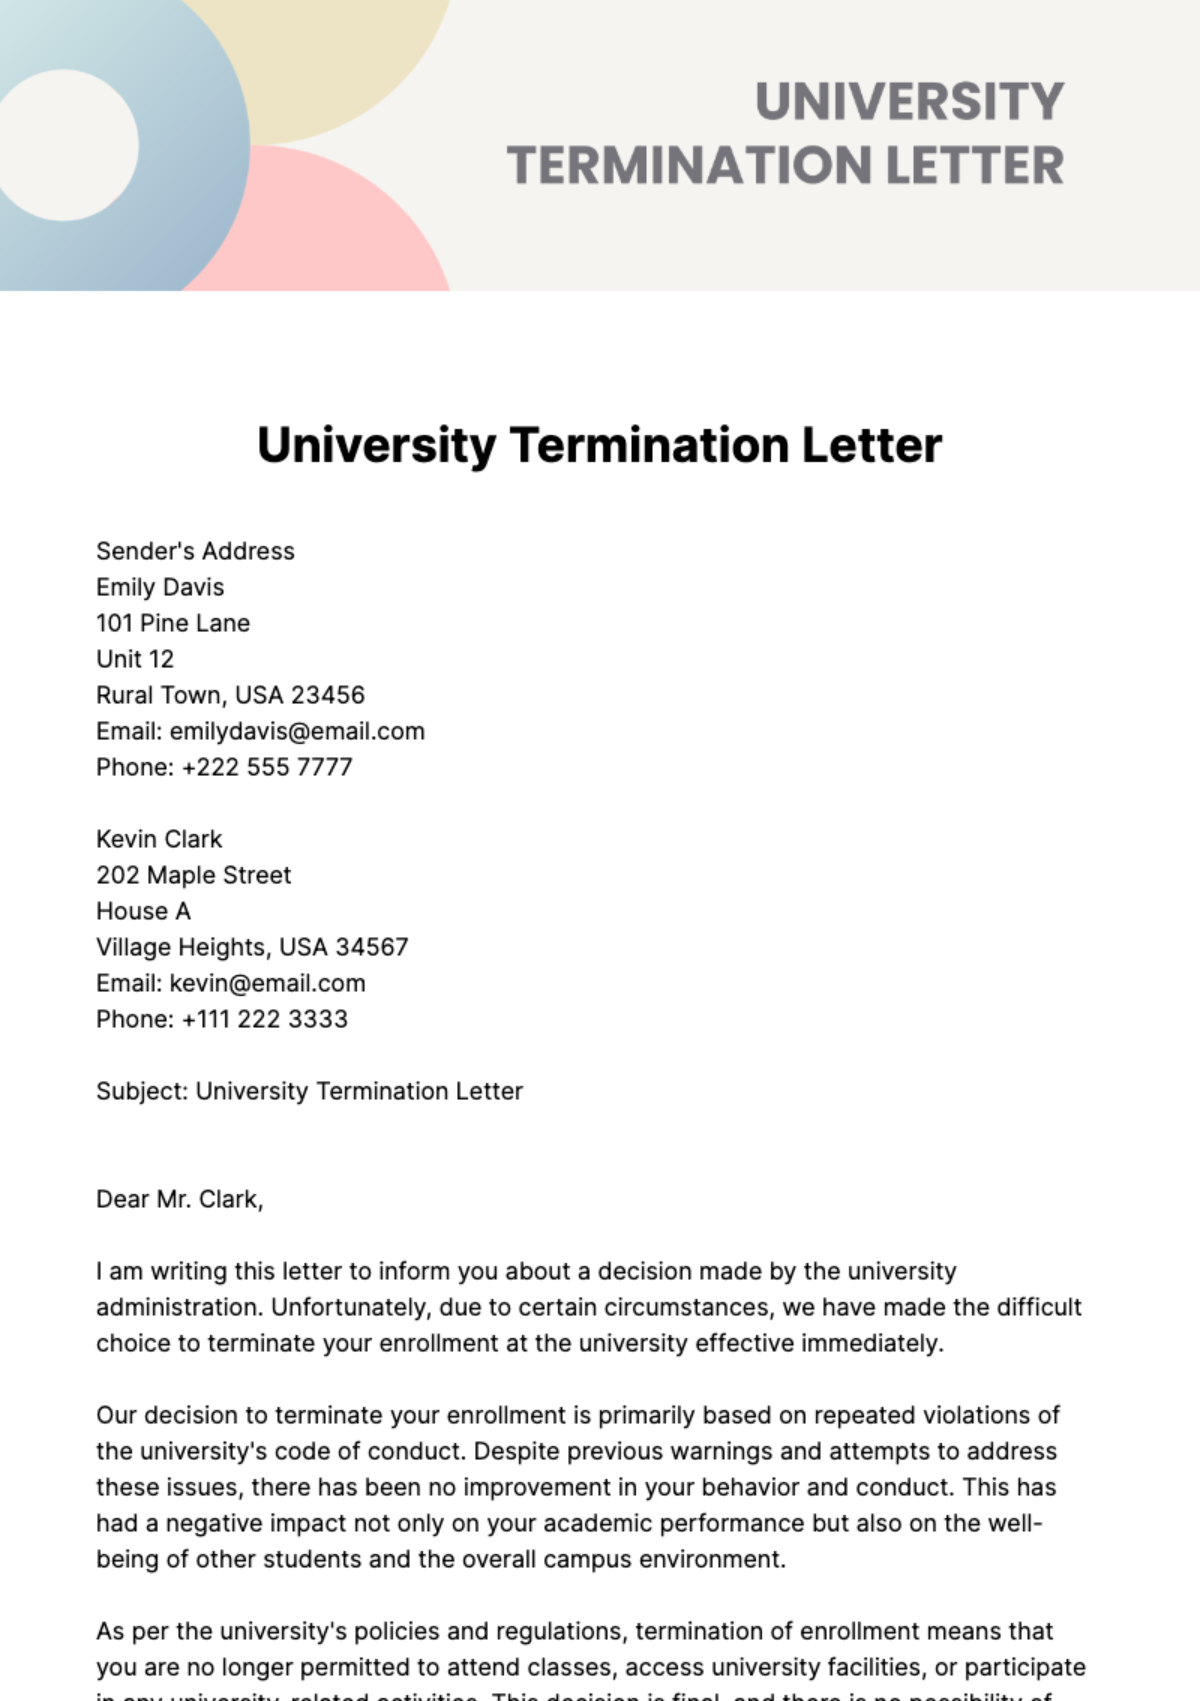 Free University Termination Letter Template